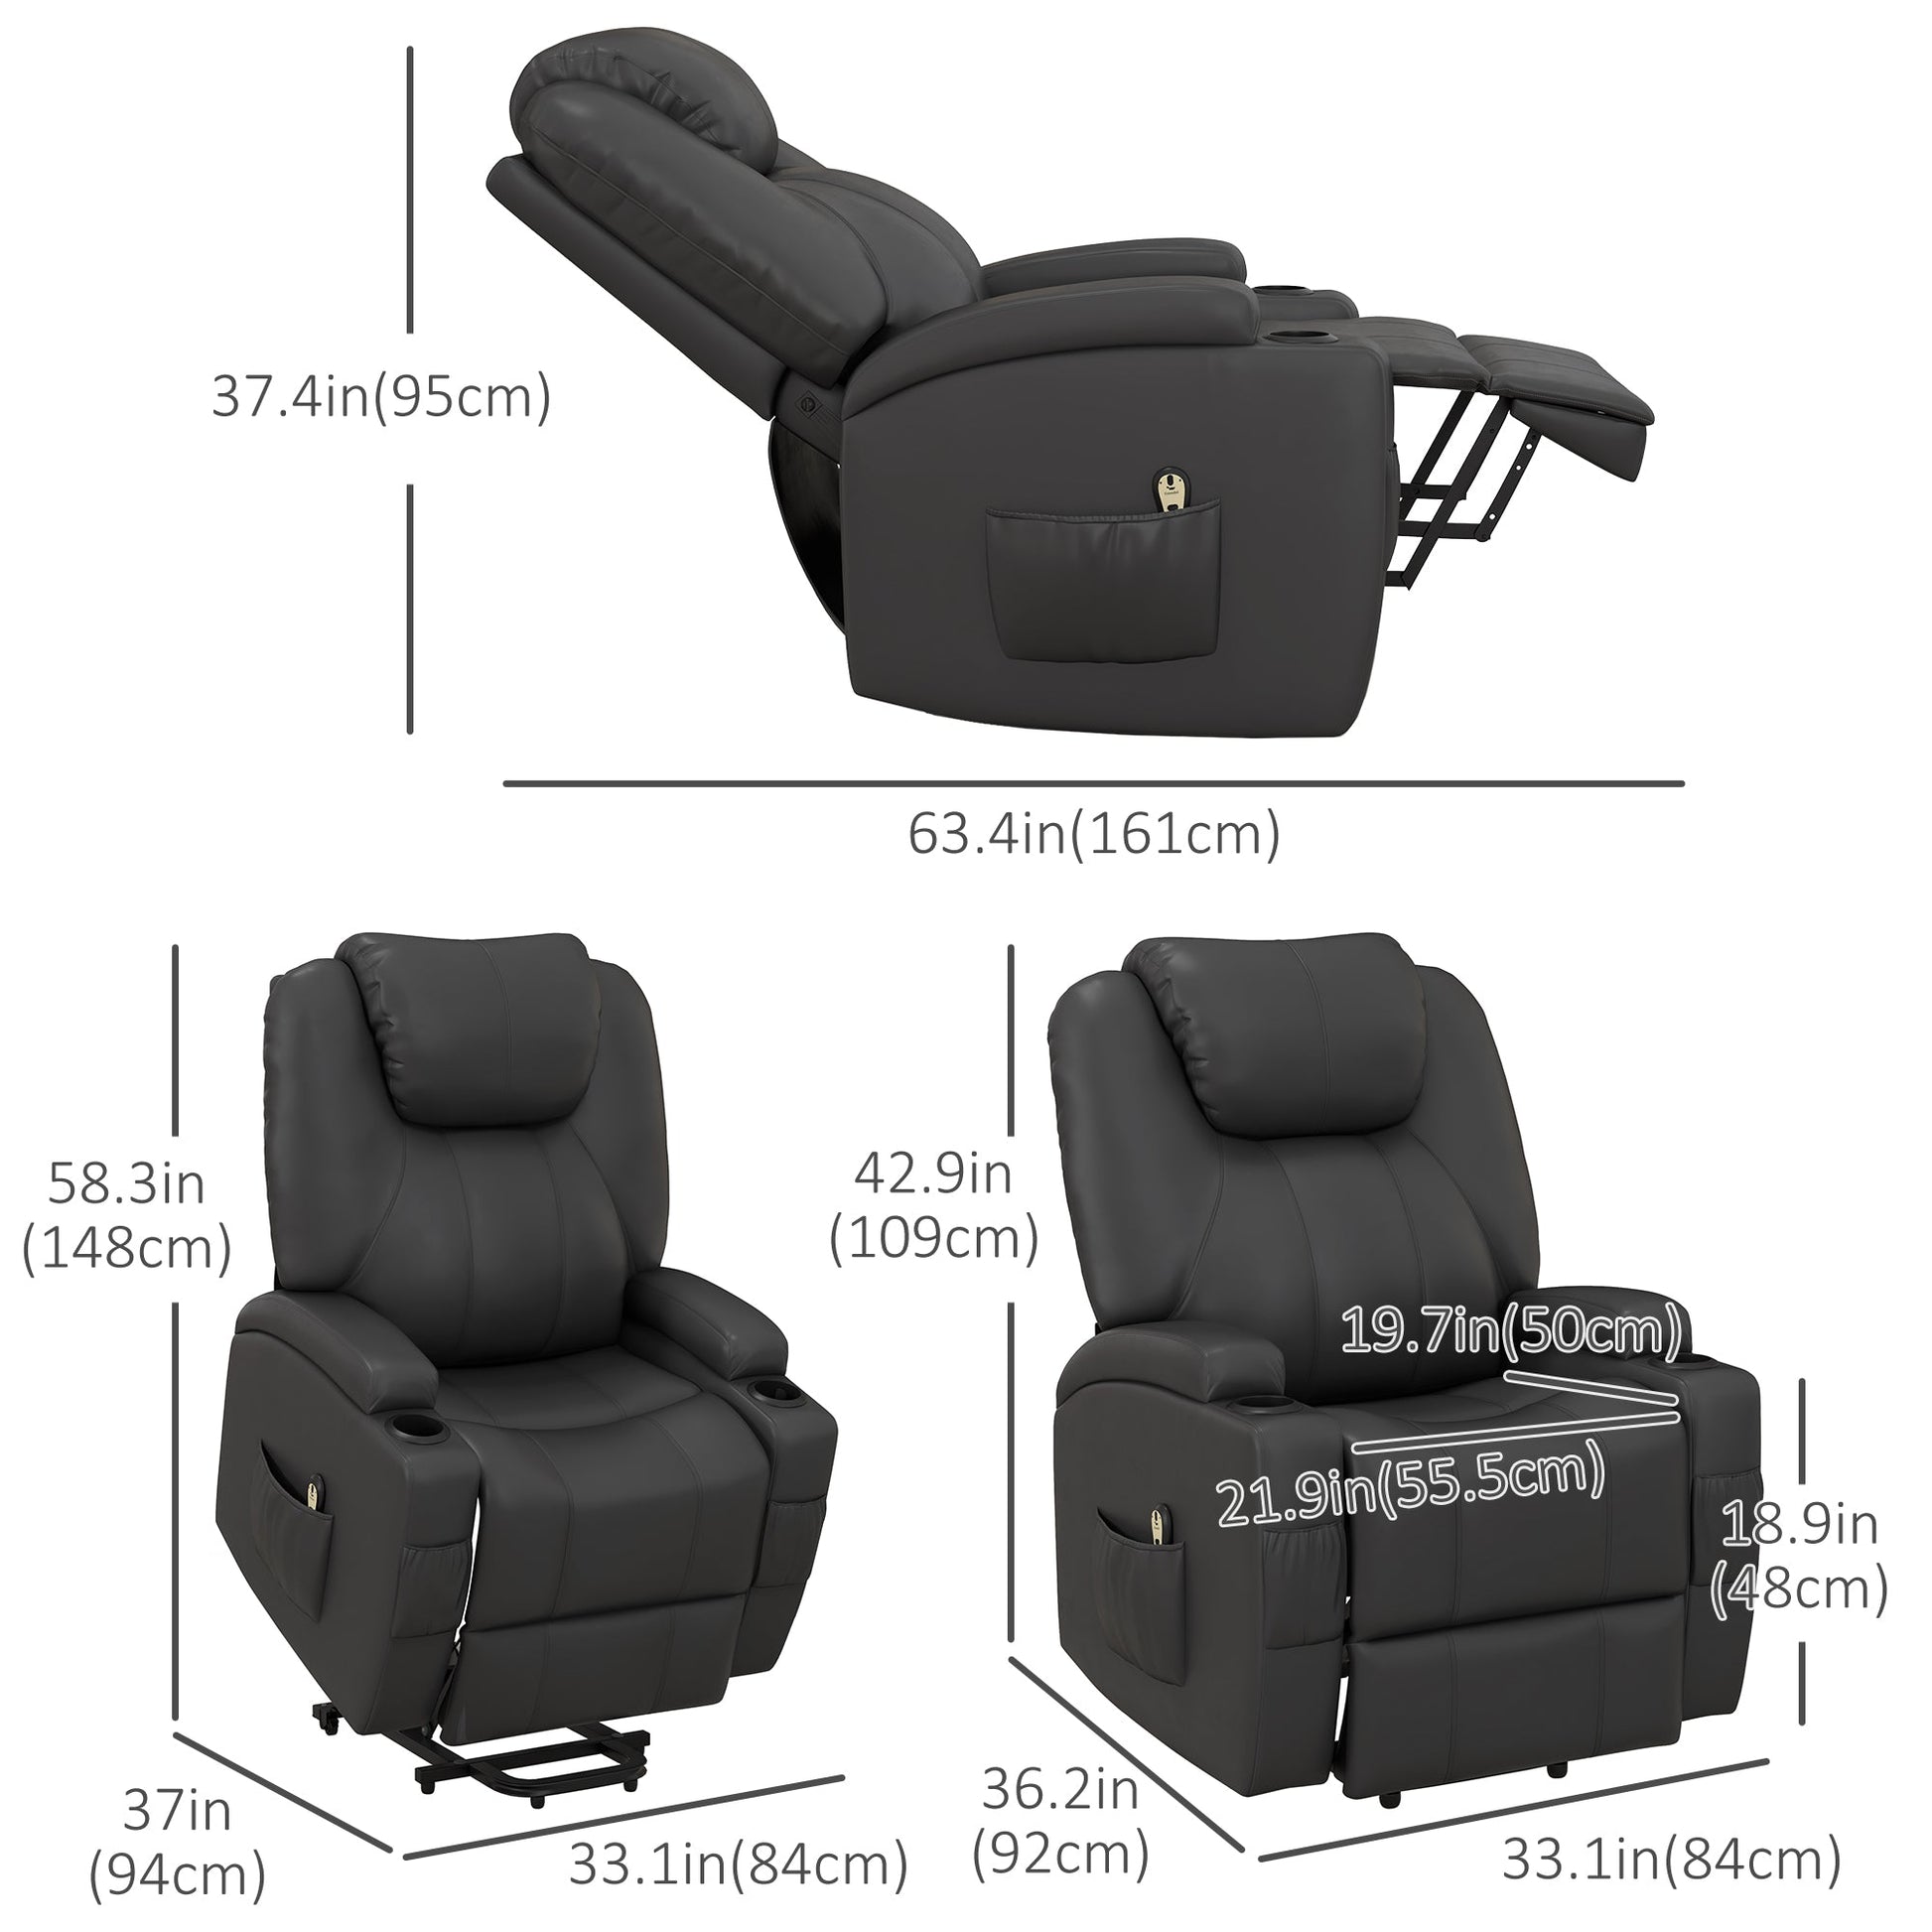 Power Recliner, Electric Lift Chair for Elderly with Footrest, Remote Control, Side Pockets and Cup Holders, Grey at Gallery Canada